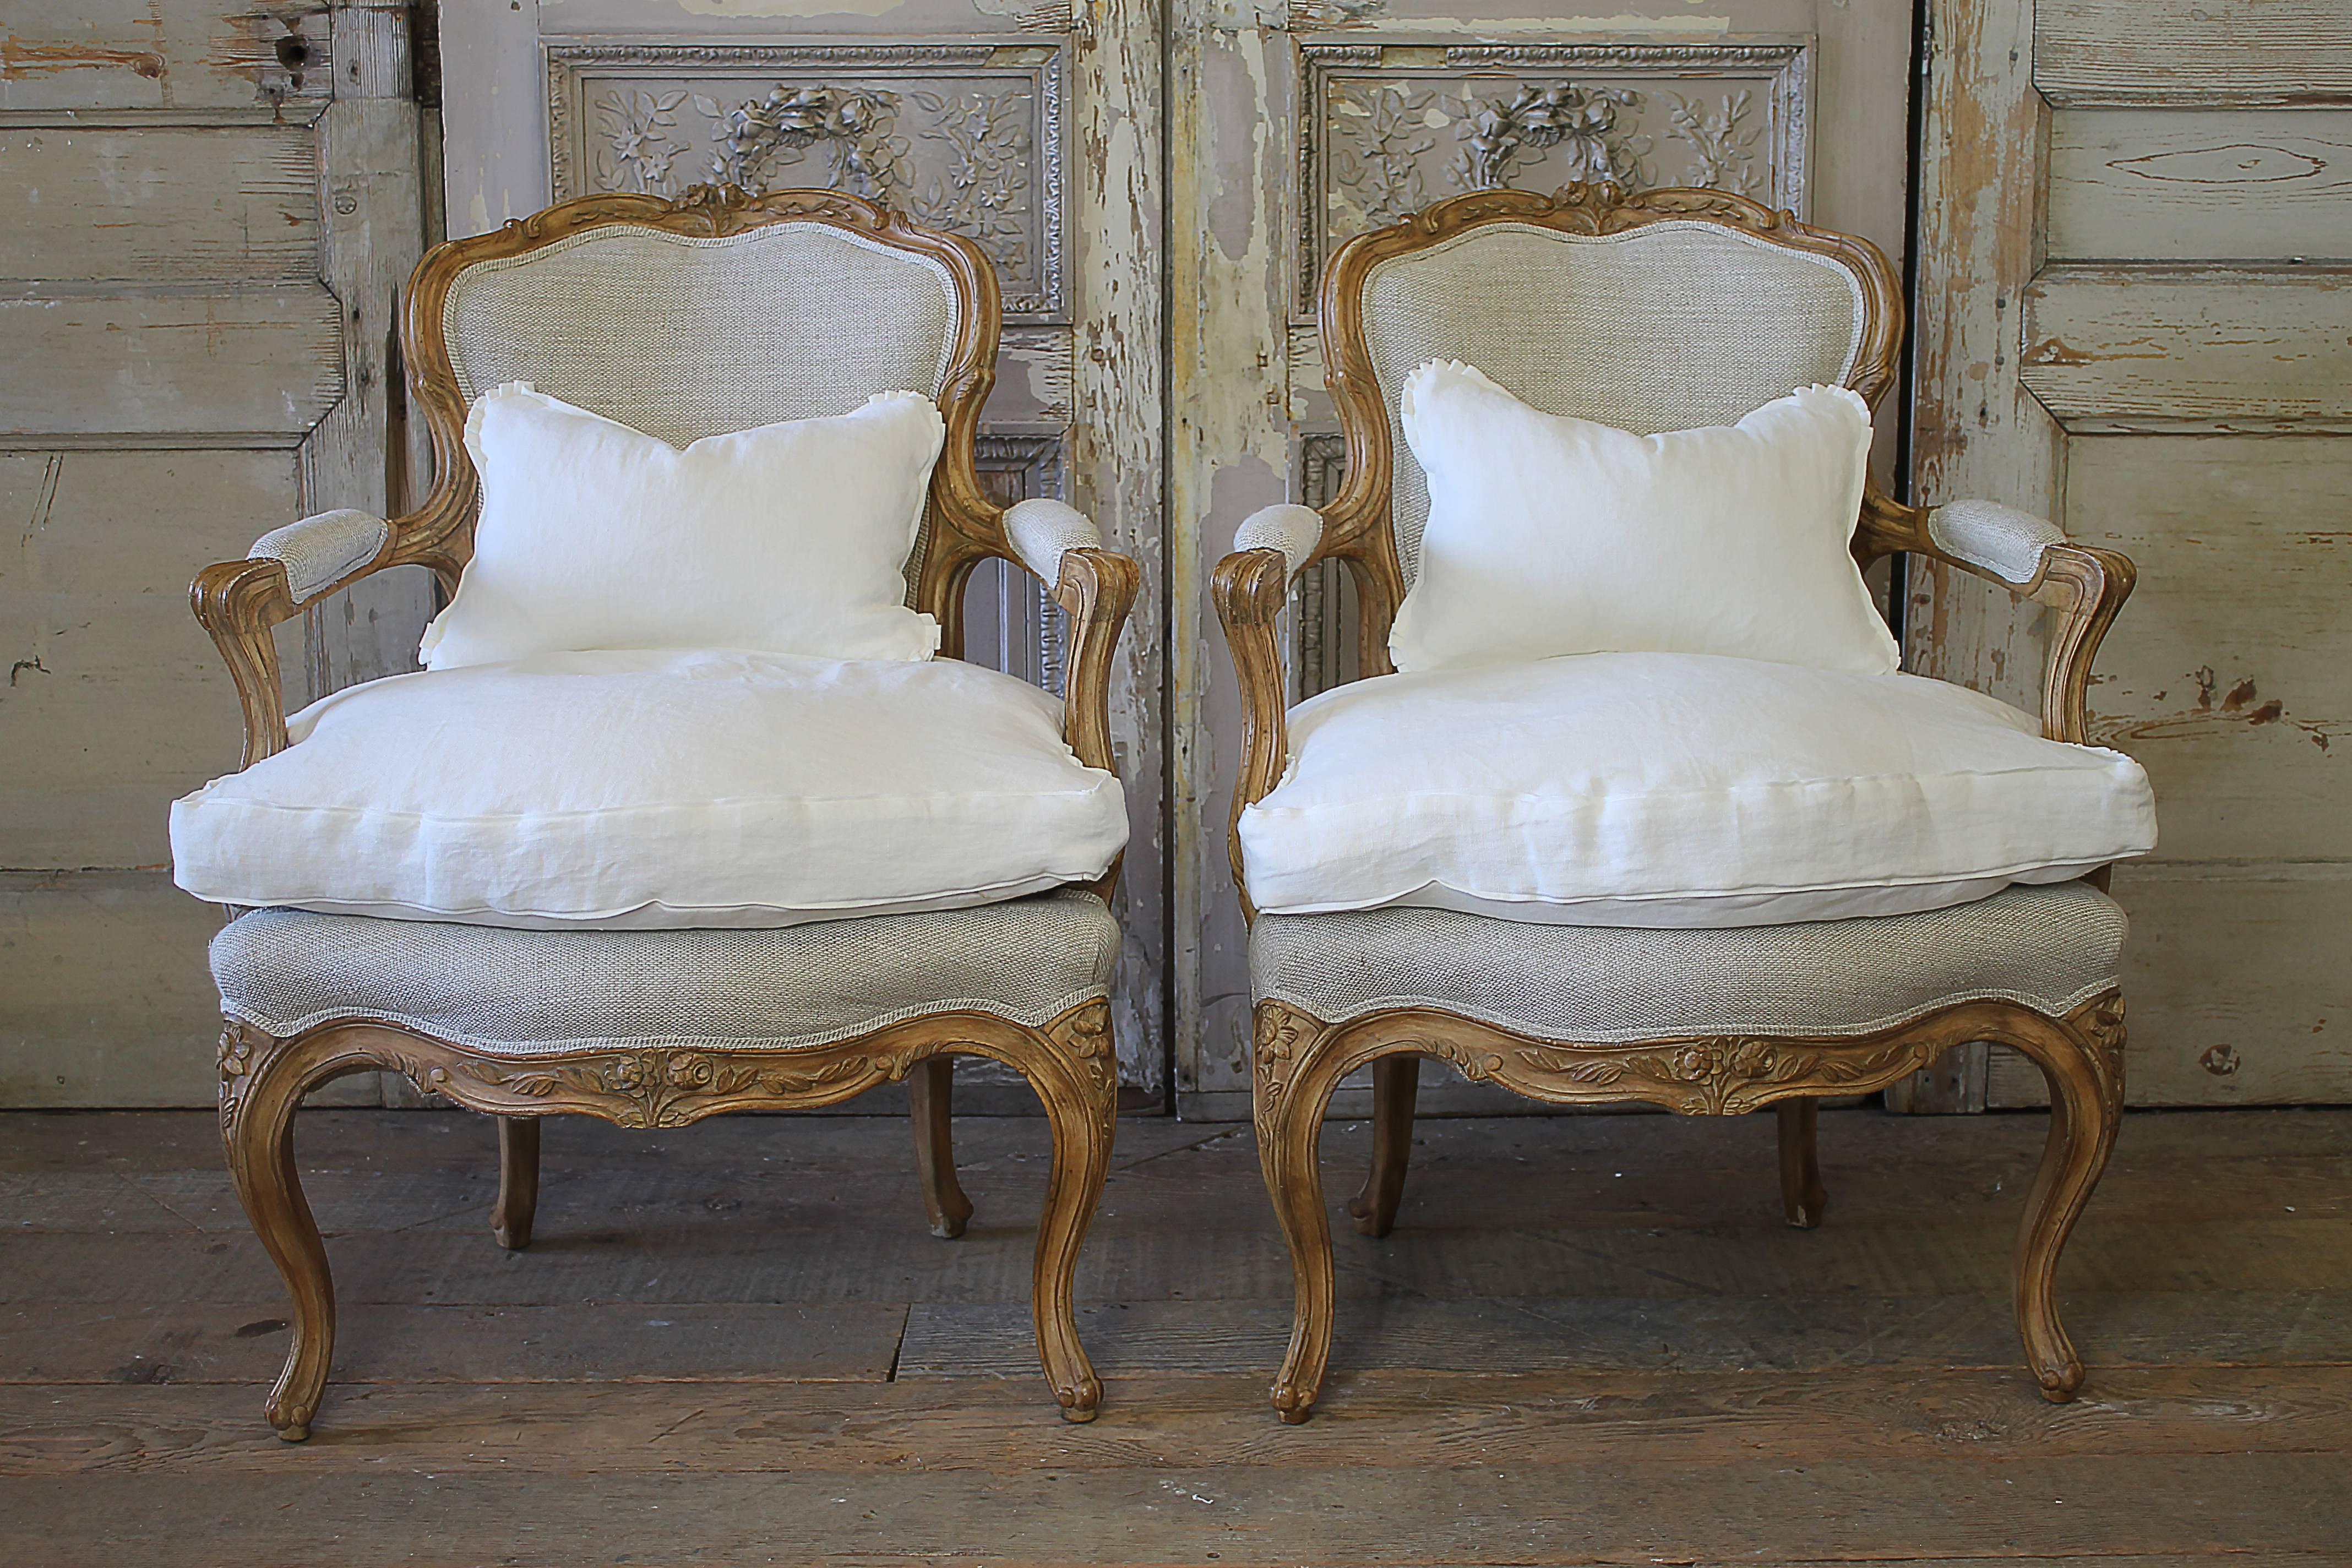 Lovely pair of antique walnut carved French Louis XV style chairs. We have upholstered these in our 100% pure Irish Burlap style linen. The linen is soft to the touch, and has a two-tone natural and soft white weave. The down seat cushions were slip